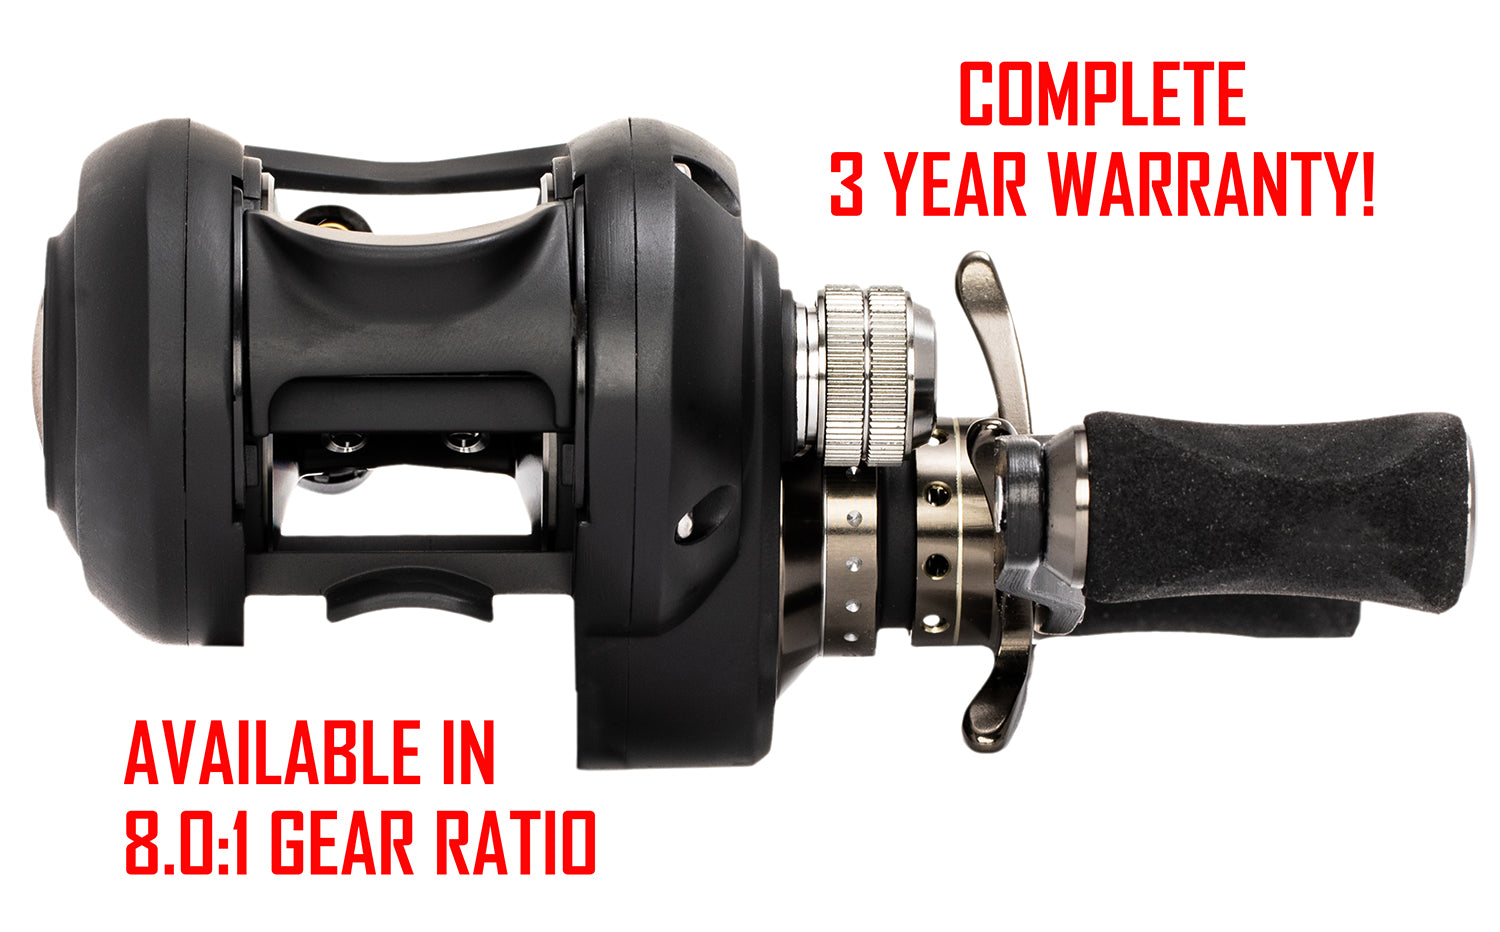 Black APEX LIGHTNING Baitcaster with red text. text: COMPLETE 3 YEAR WARRANTY! AVAILABLE IN 8.0:1 GEAR RATIO